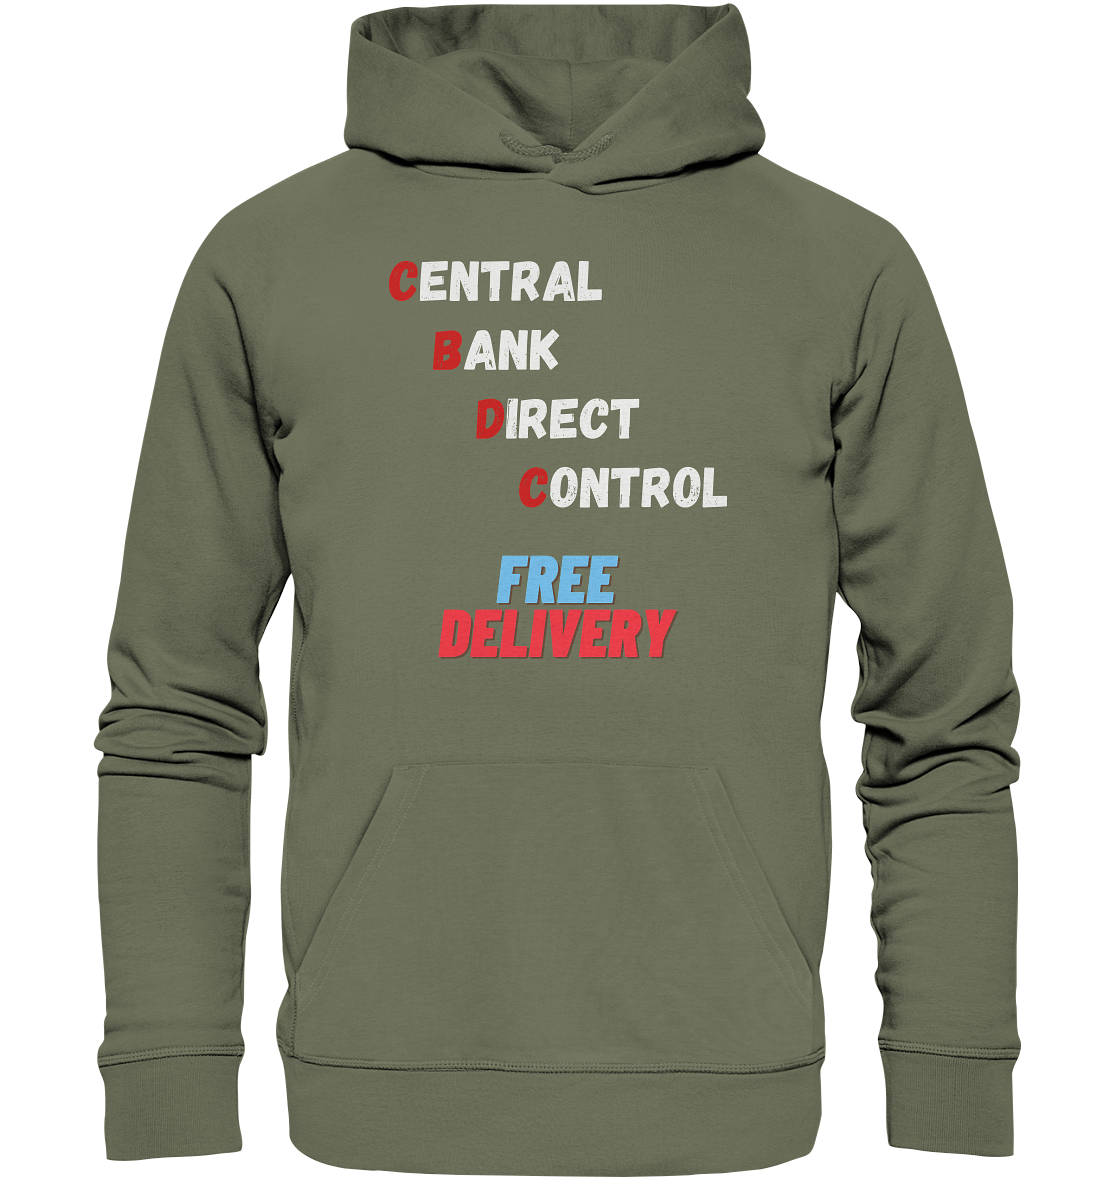 CENTRAL BANK DIRECT CONTROL - FREE DELIVERY - Premium Unisex Hoodie